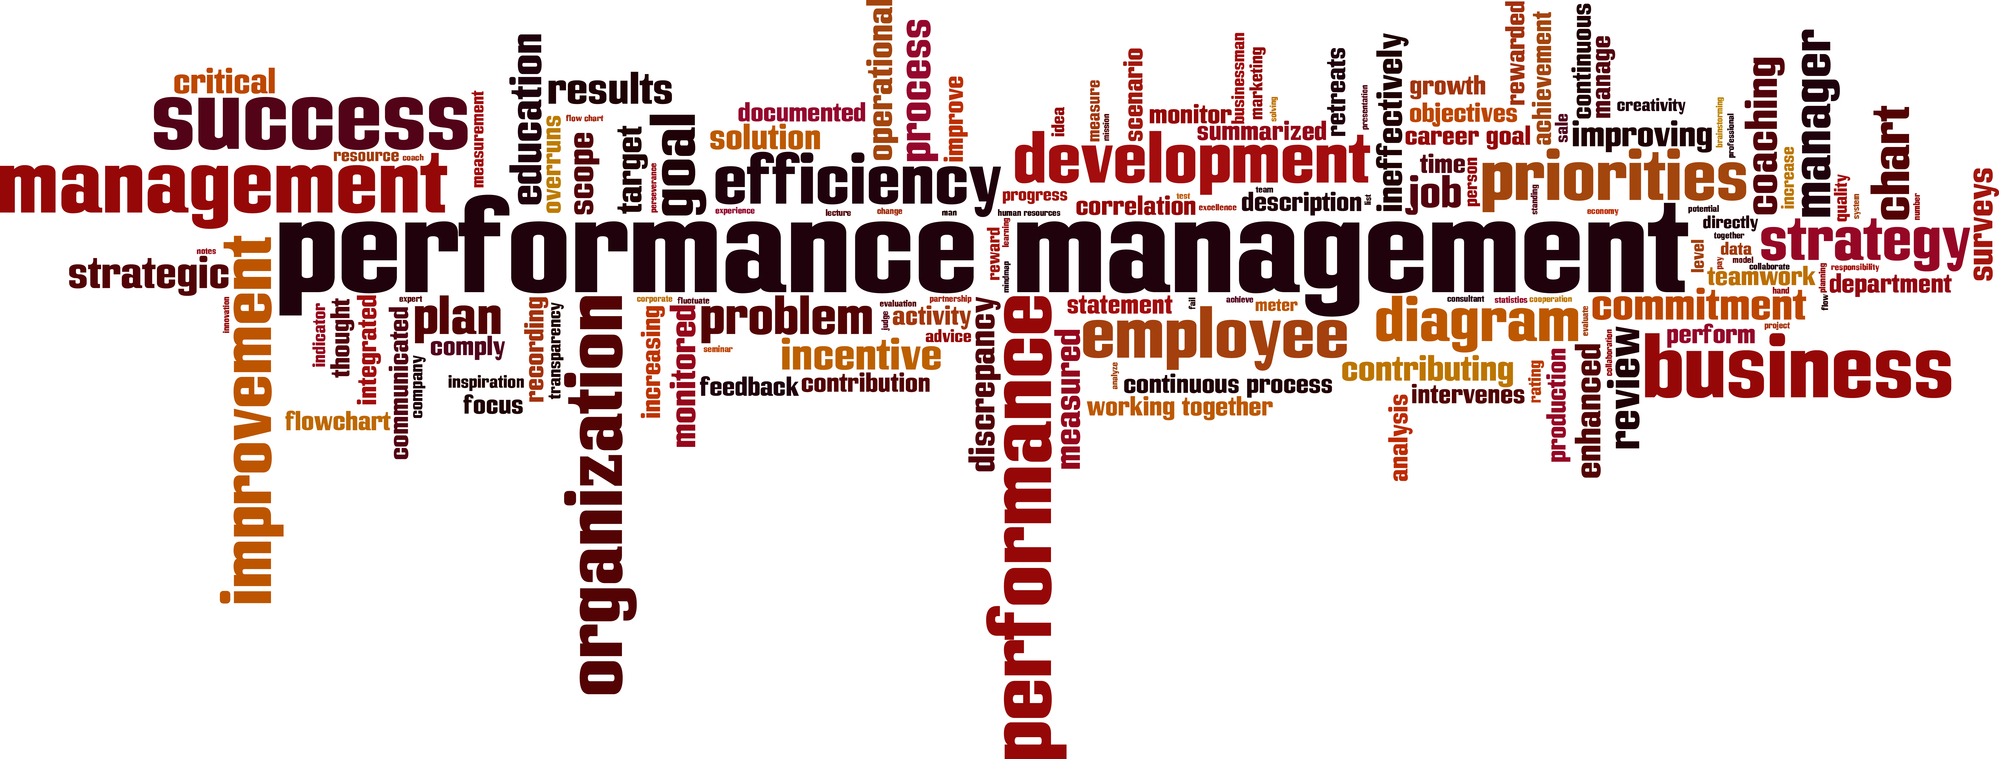 A word cloud focused around "performance management", some of the associated terms generated consist of: "management, success, improvement, organization, etc."